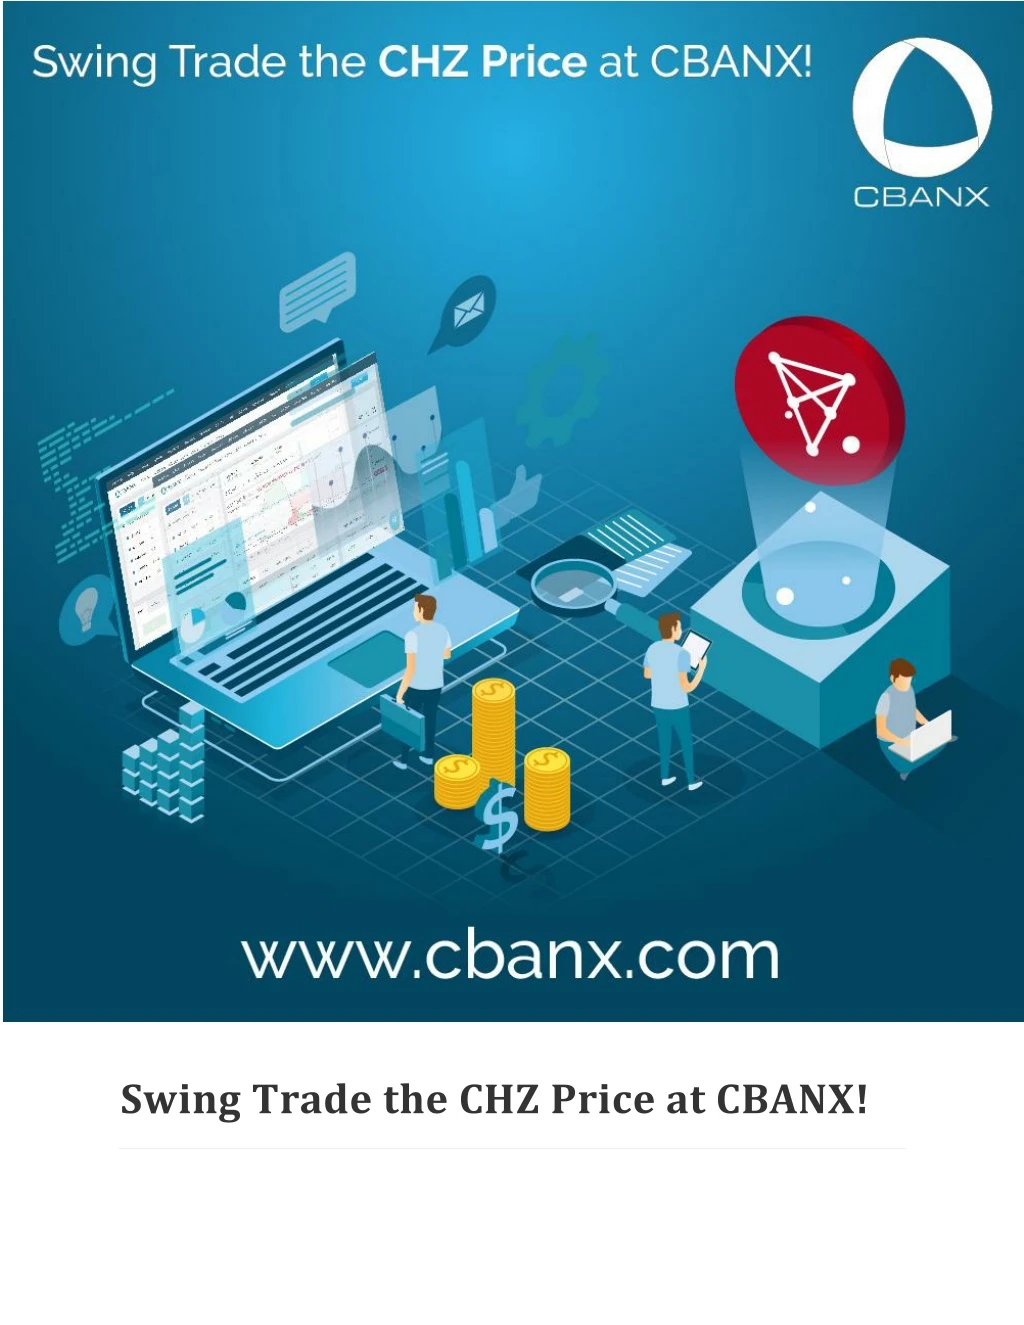 swing trade the chz price at cbanx